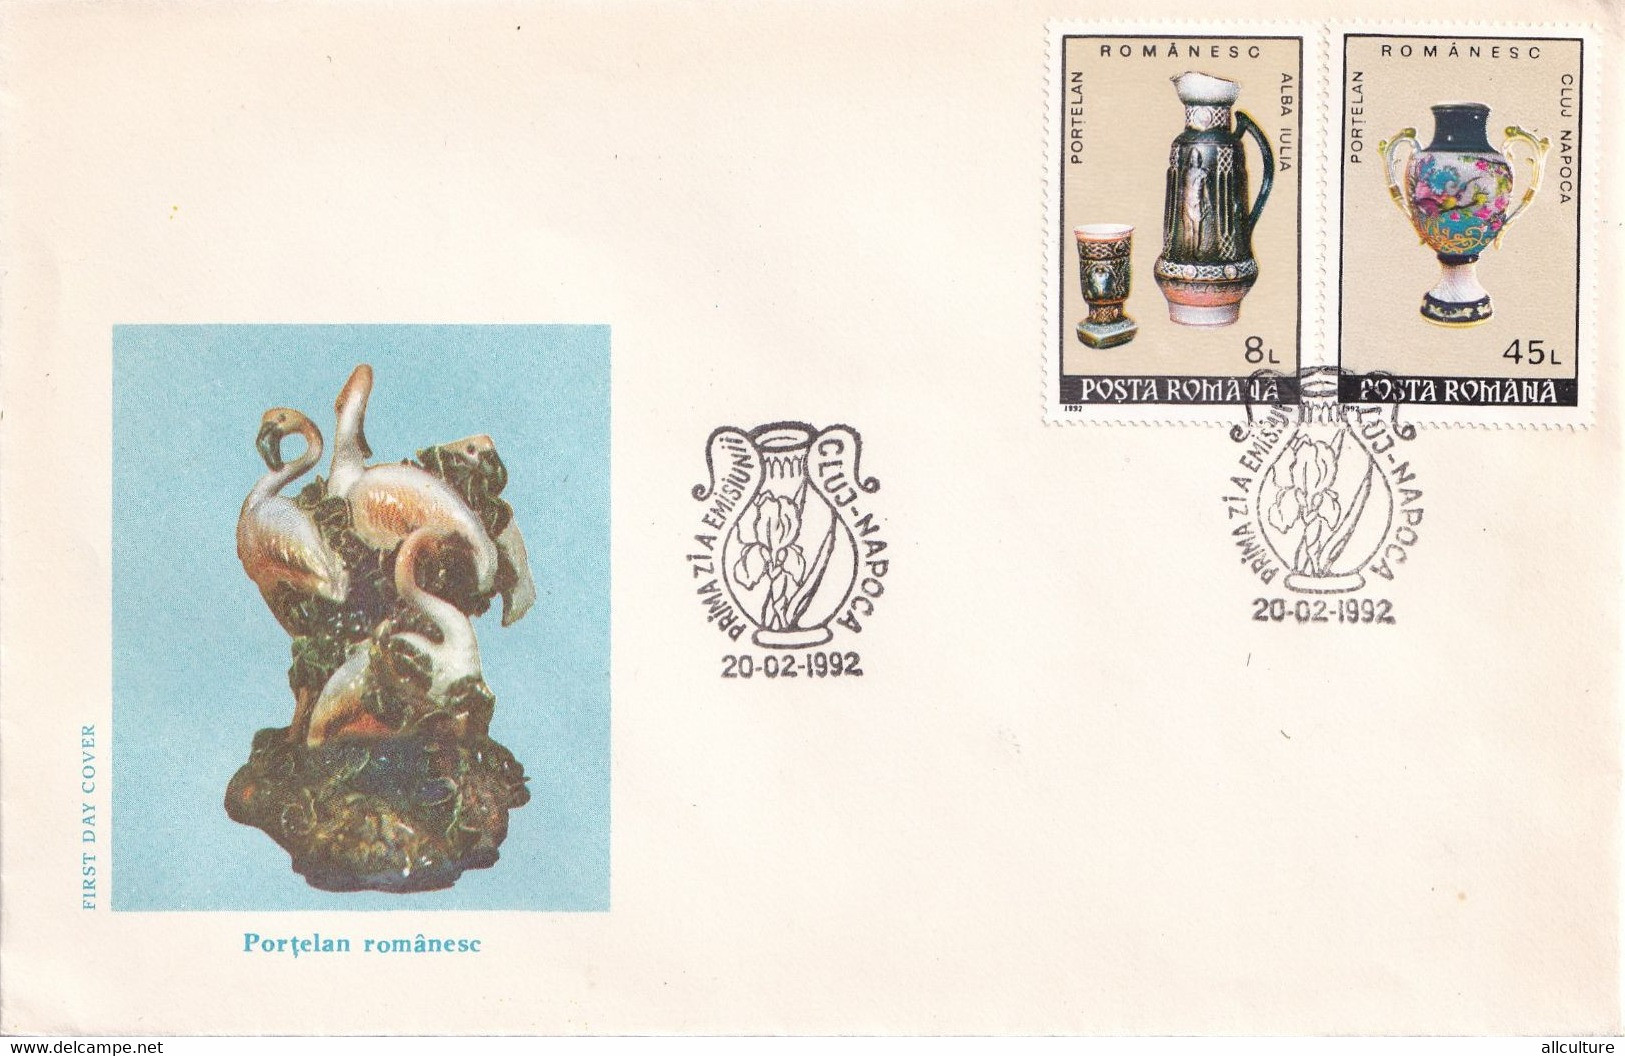 A2852 - Romanian Porcelain, Romania, Cluj Napoca 1992 2 Covers First Day Cover - Porcelain